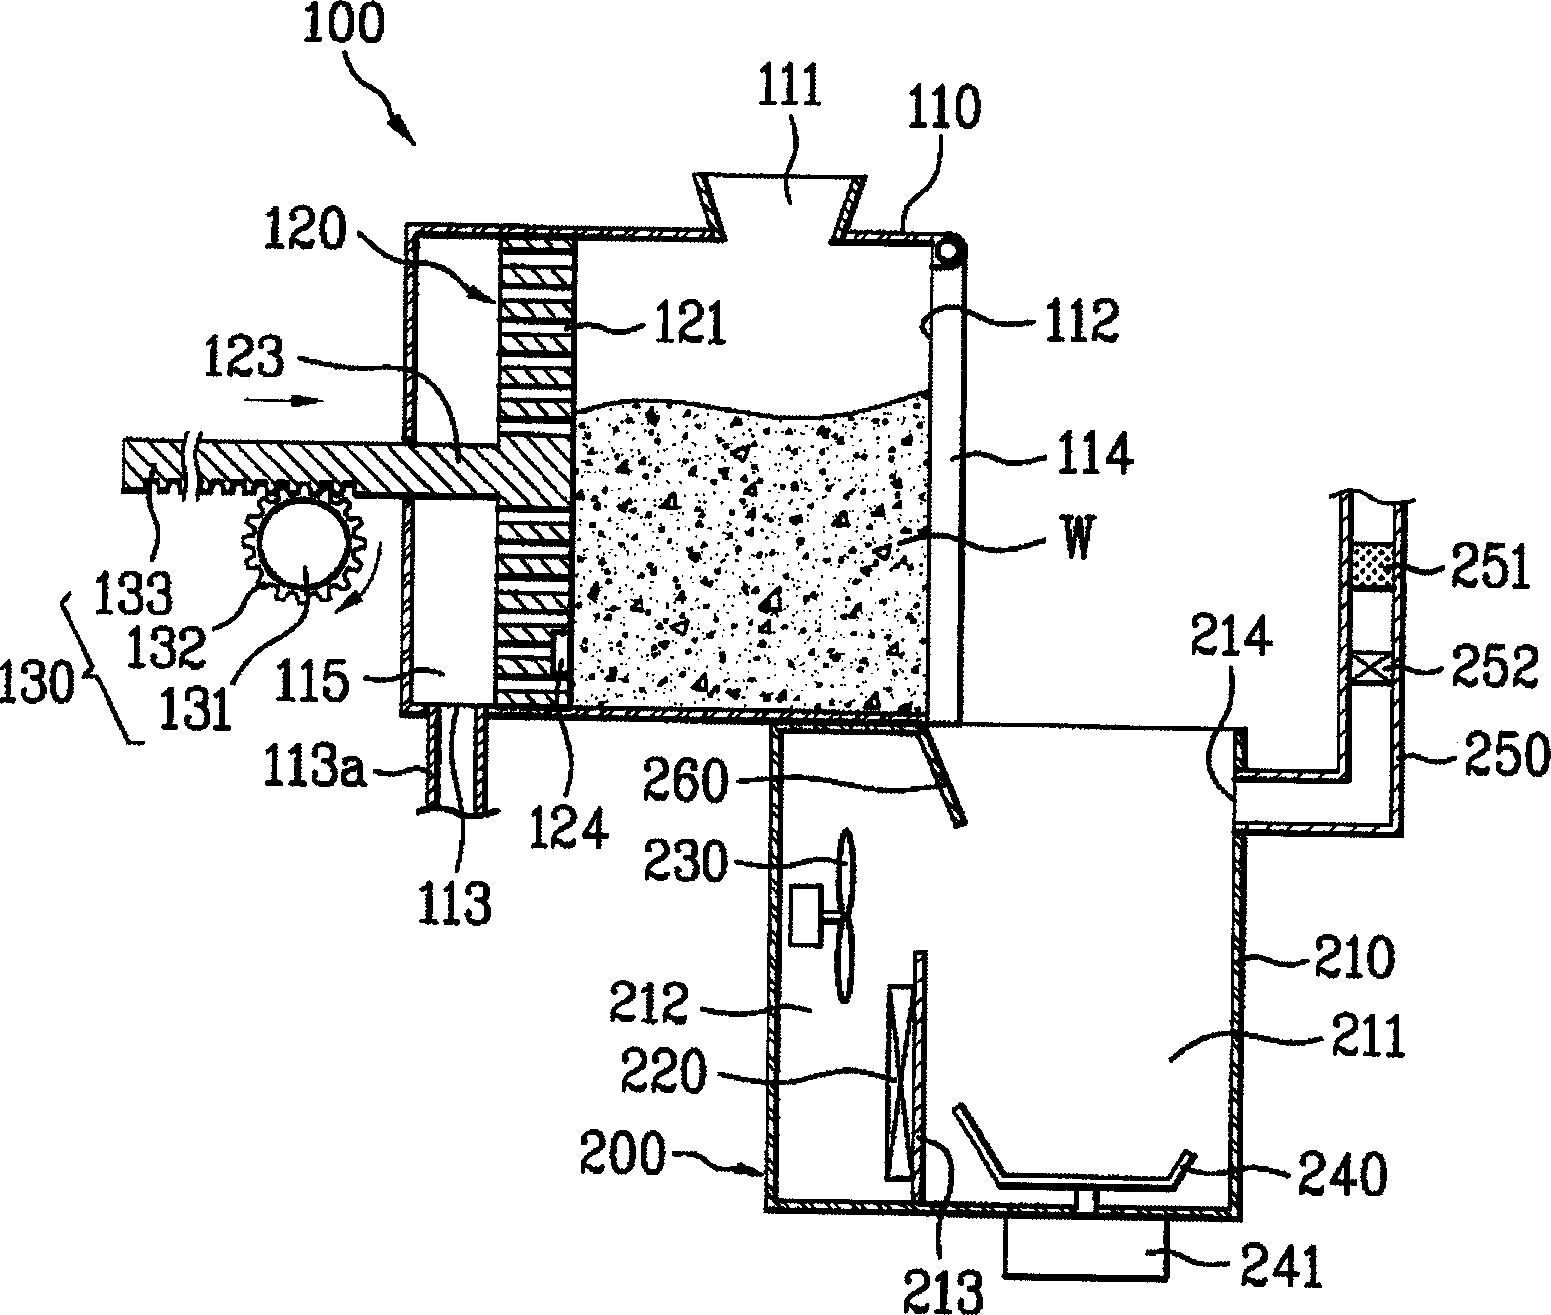 Apparatus for processing organic substance